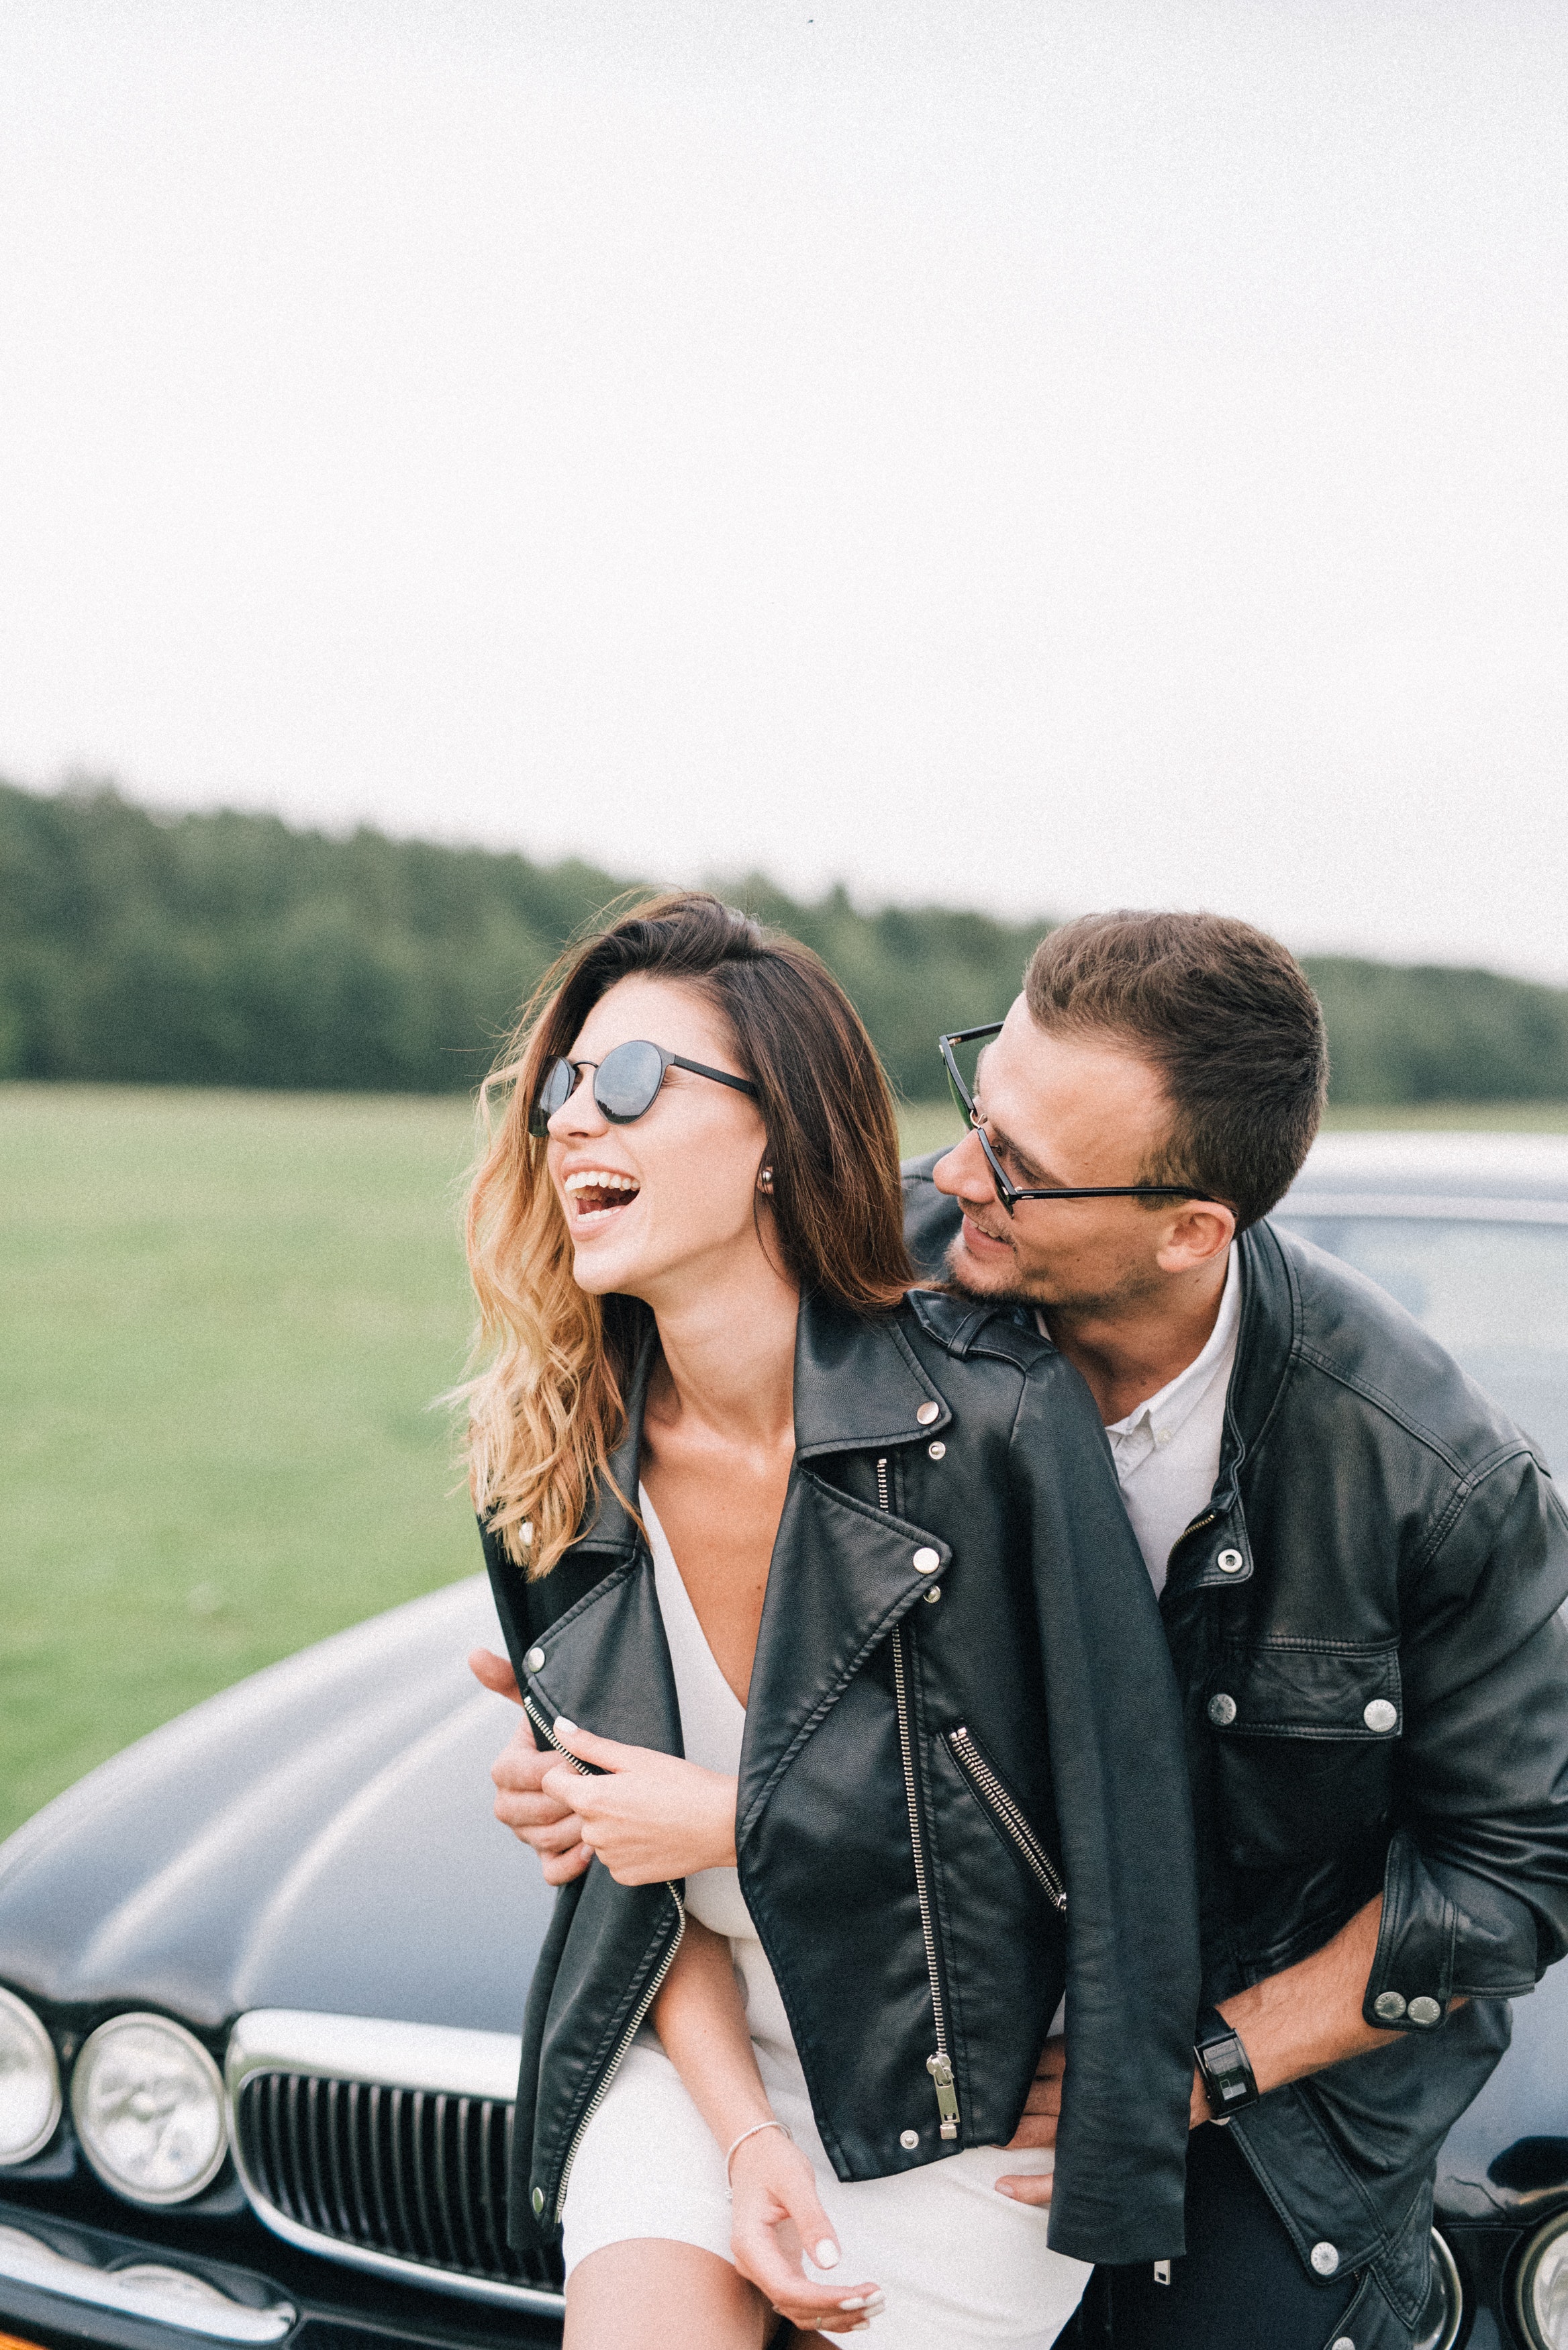 A couple sits happily on the front hood of the car. | Source: Pexels